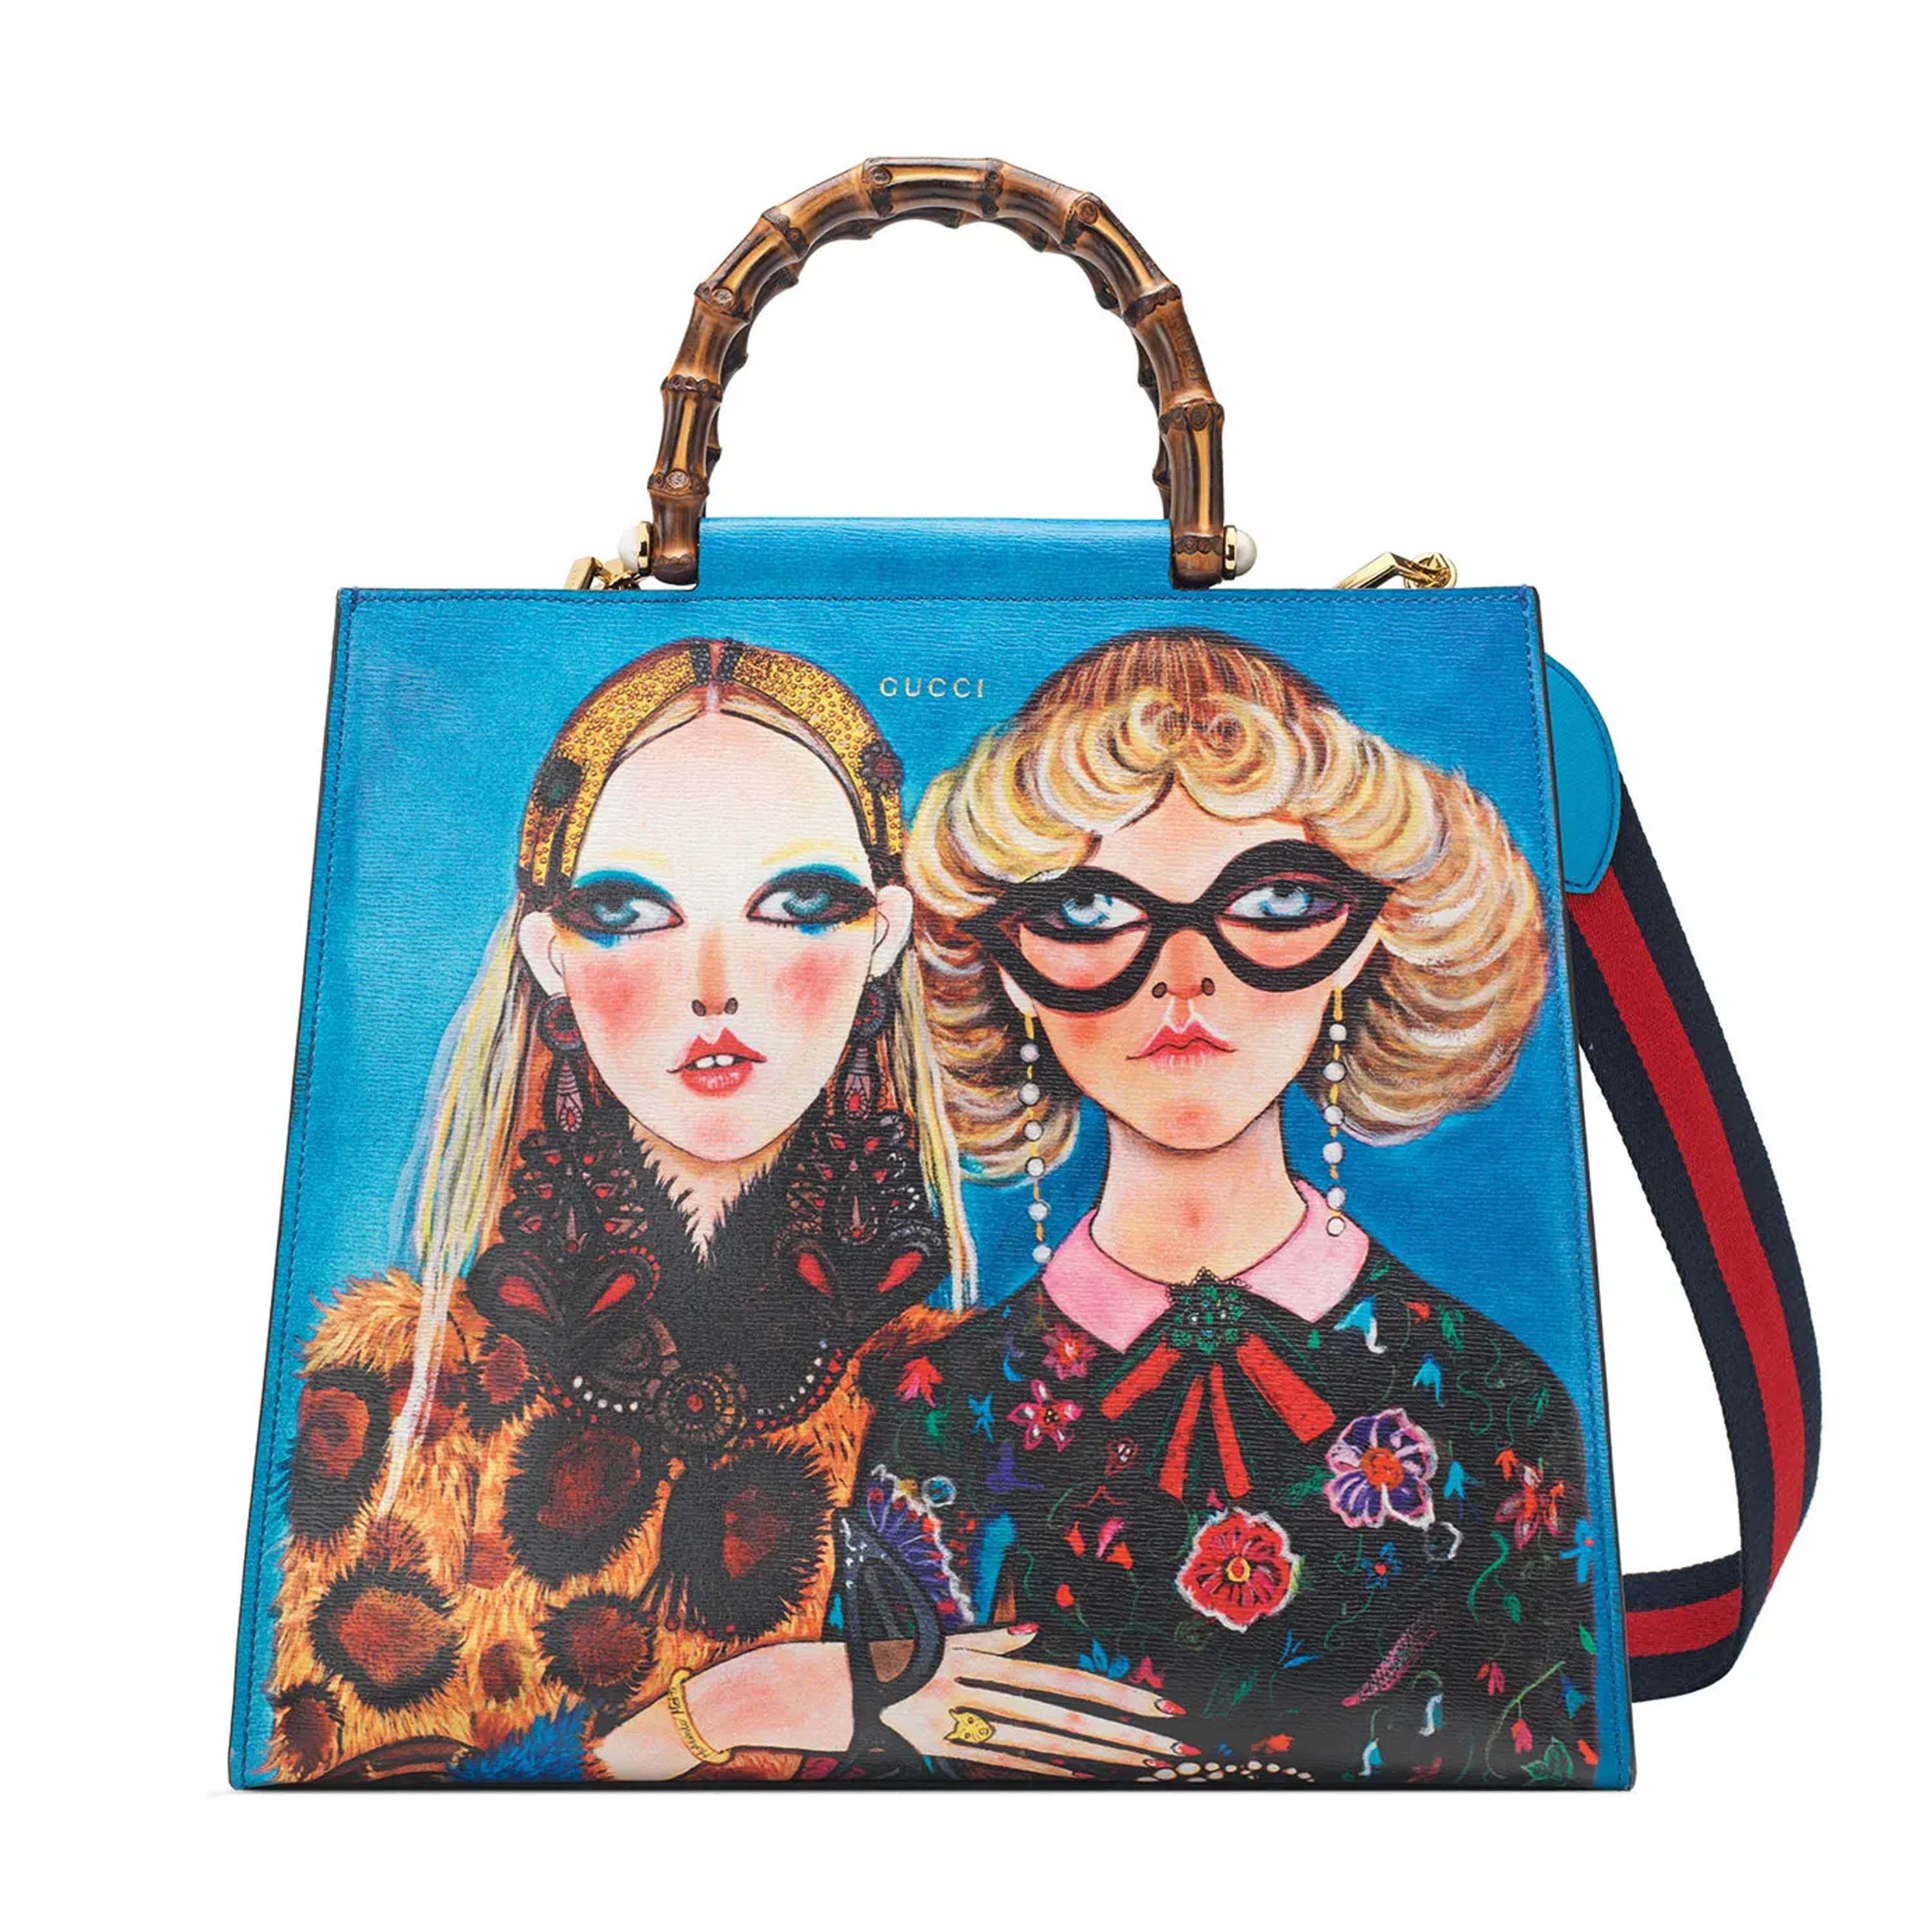 Designer Collaborations: The Most Iconic Bags